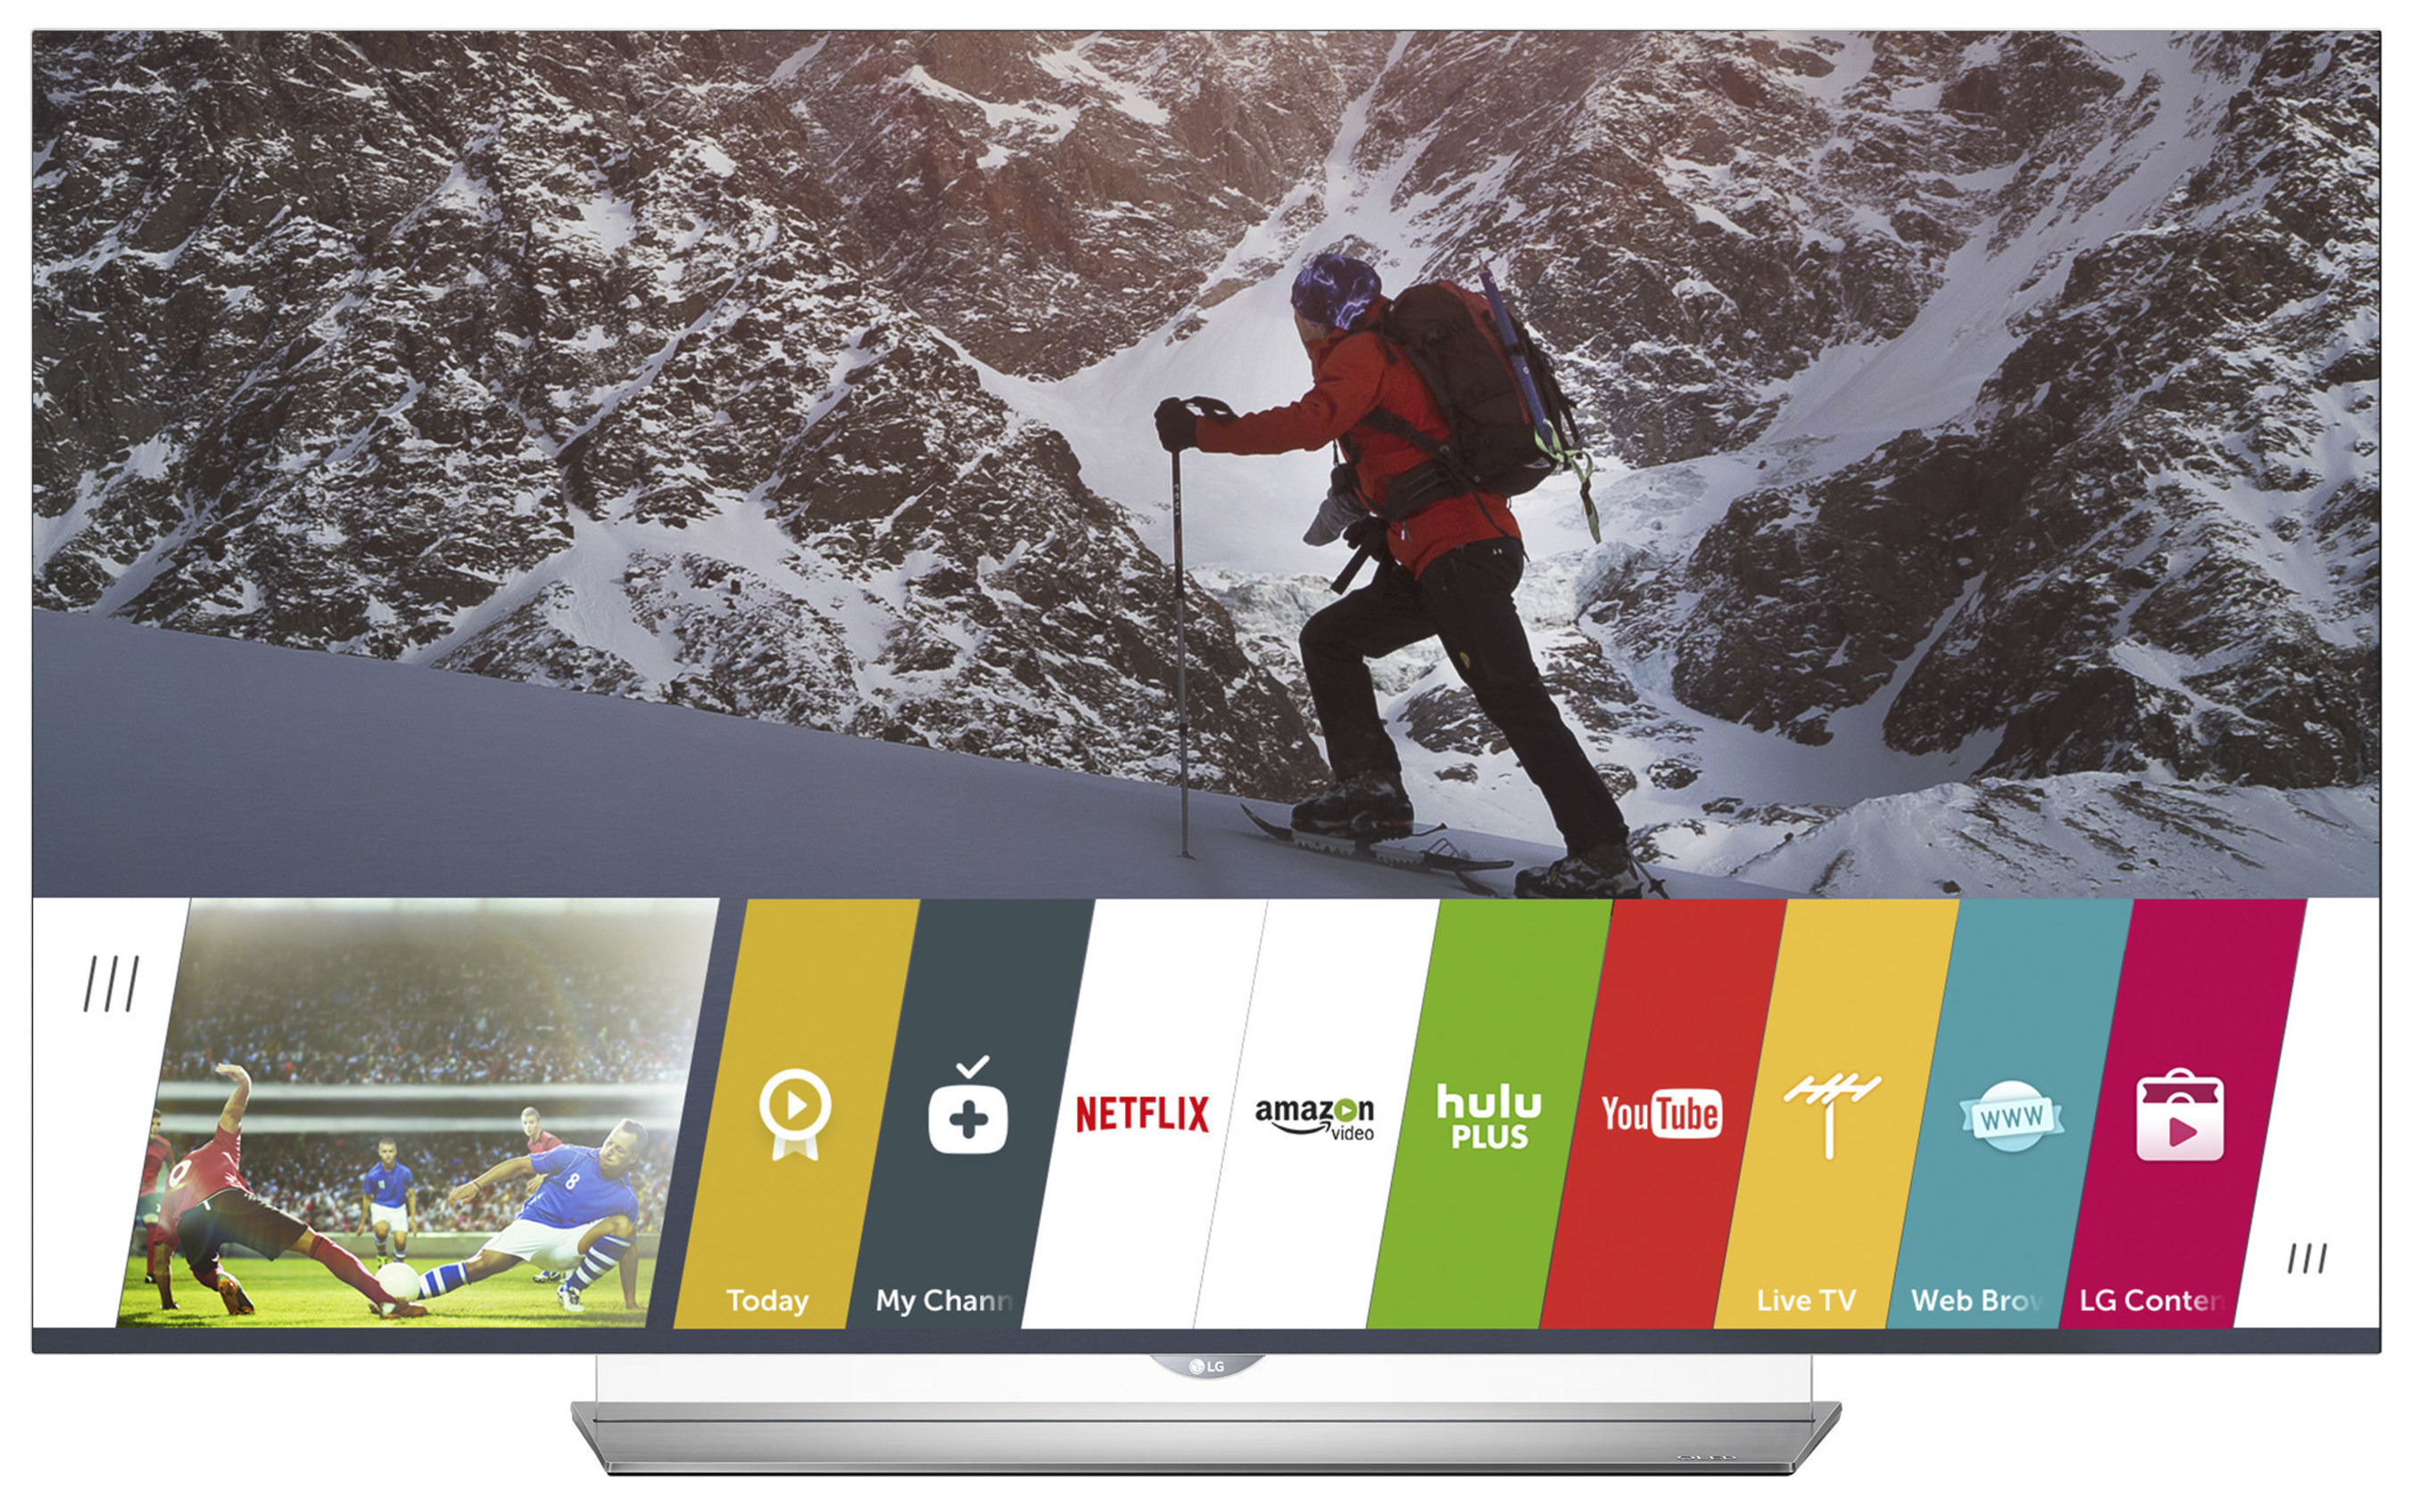 LG Electronics USA today announced expanded content partners for its webOS Smart TV platform, including access to Full HD and 4K streaming content for DIRECTV subscribers - giving LG Smart TV owners more home entertainment options than ever before on models such as the newly-launched EF9500 (pictured).